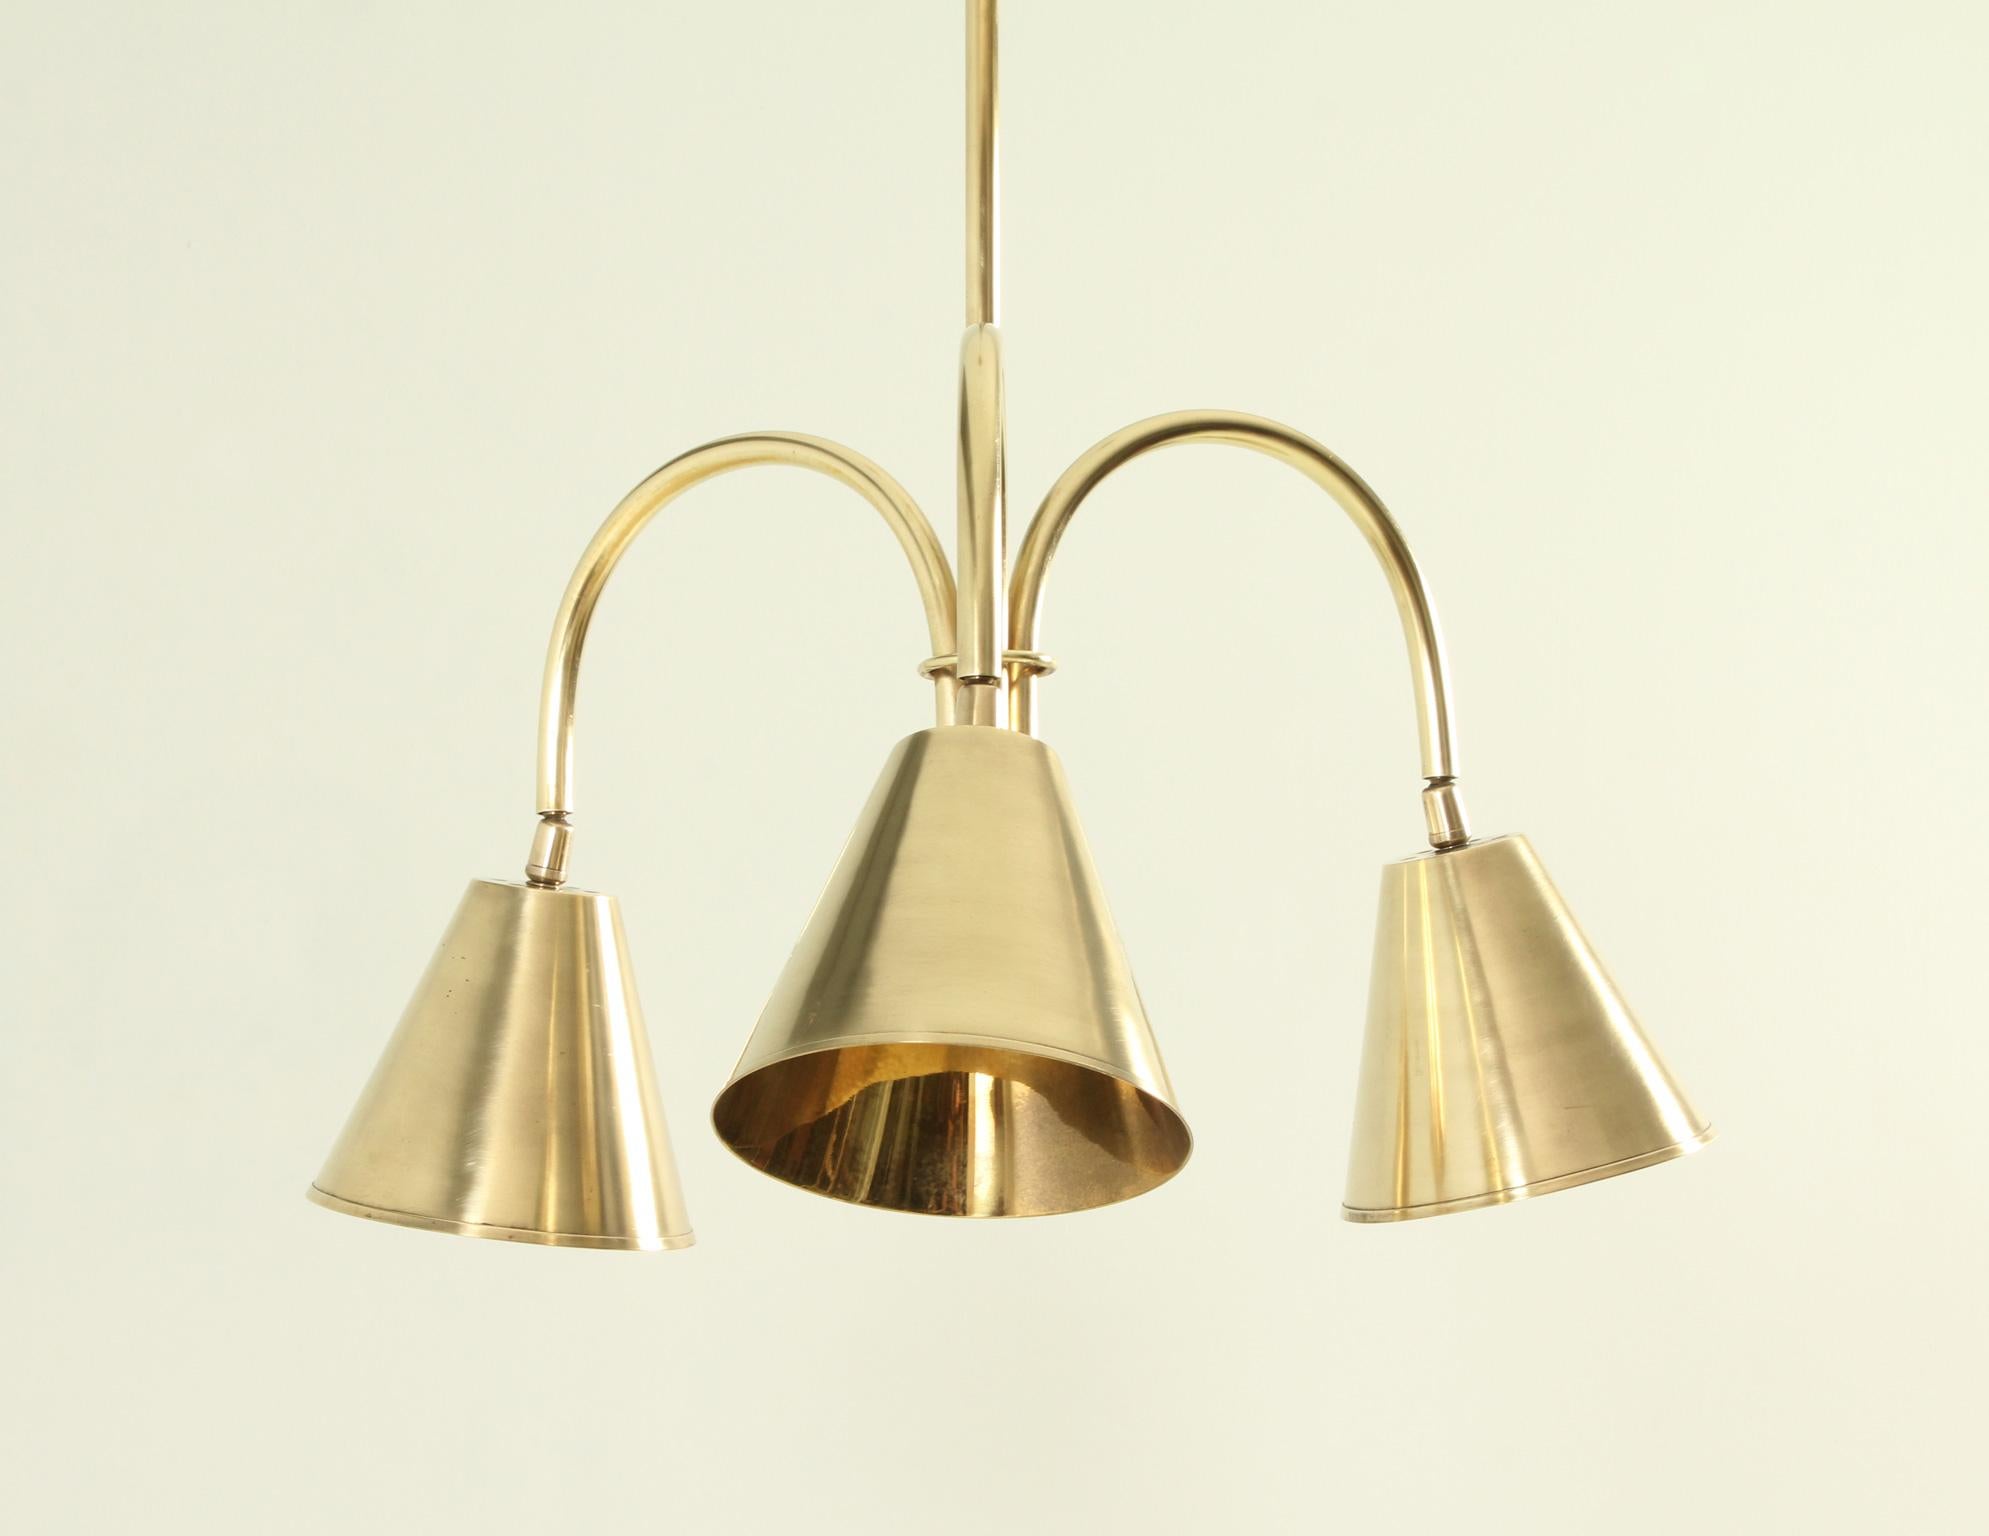 Brass Ceiling Lamp by Valenti, Spain 1950's For Sale 1